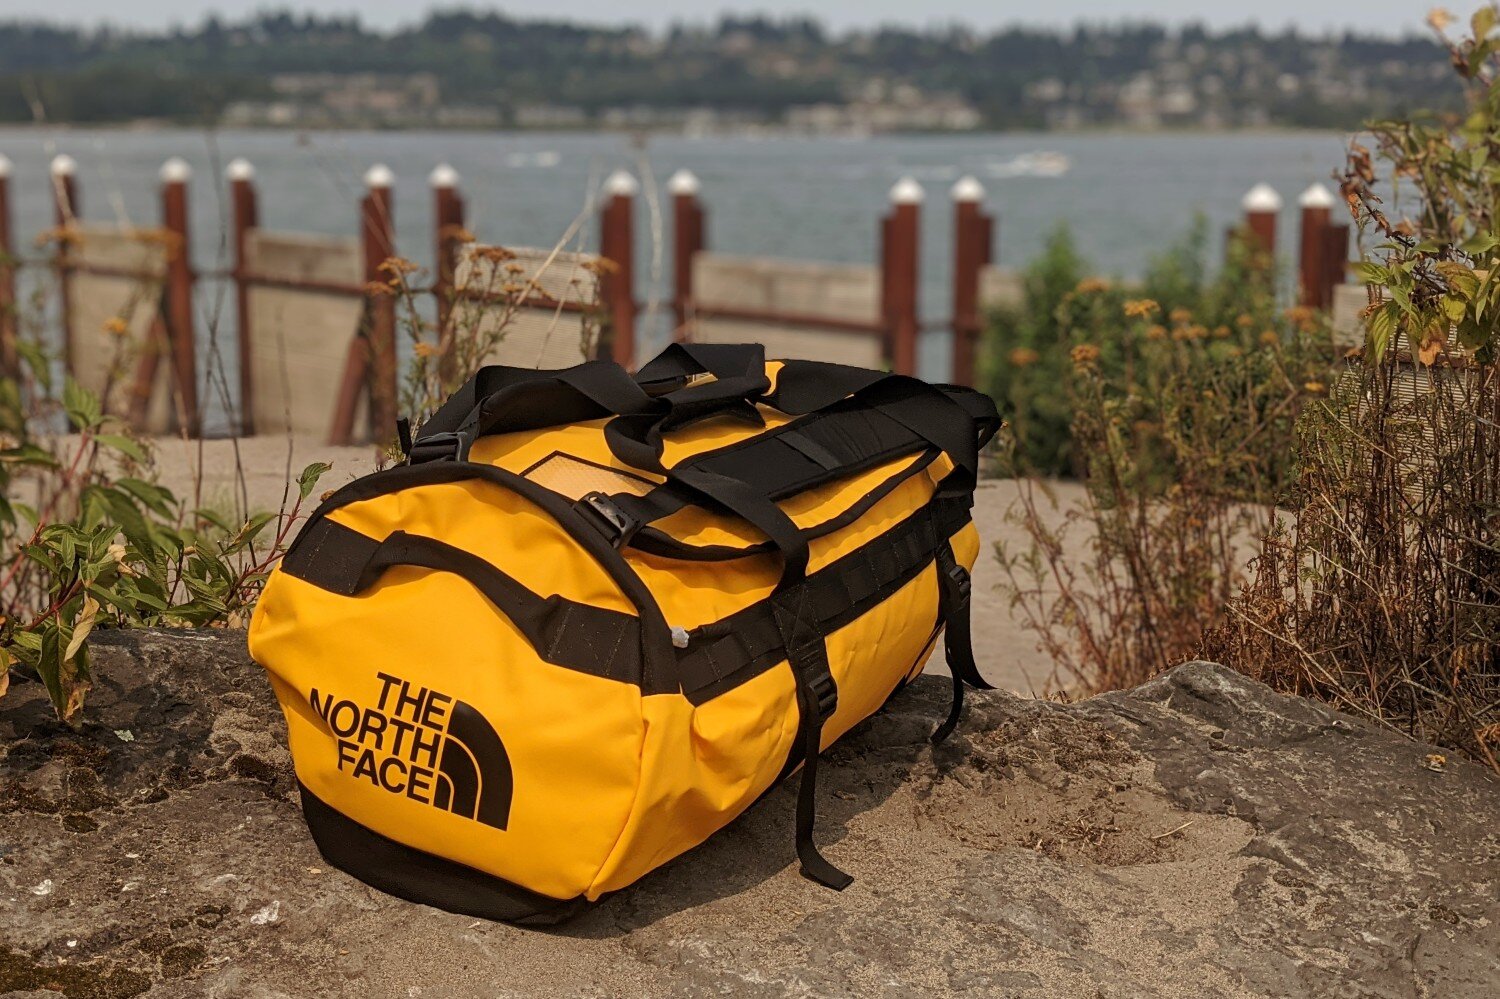 The thick material on the North Face Base Camp duffel bag is designed for rugged adventuring